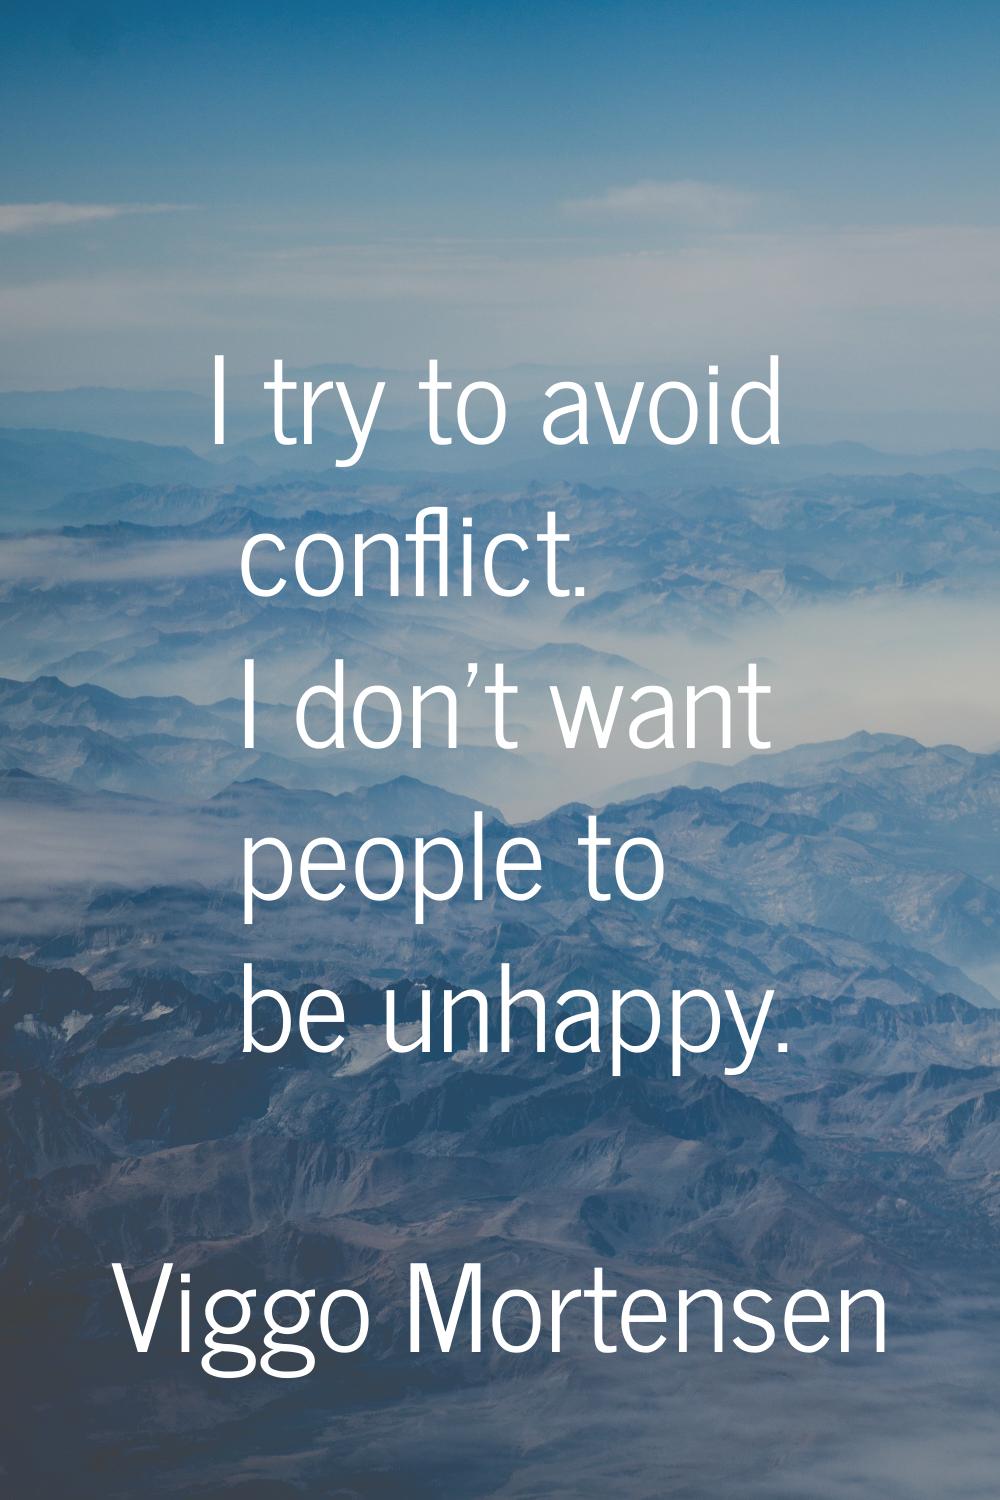 I try to avoid conflict. I don't want people to be unhappy.